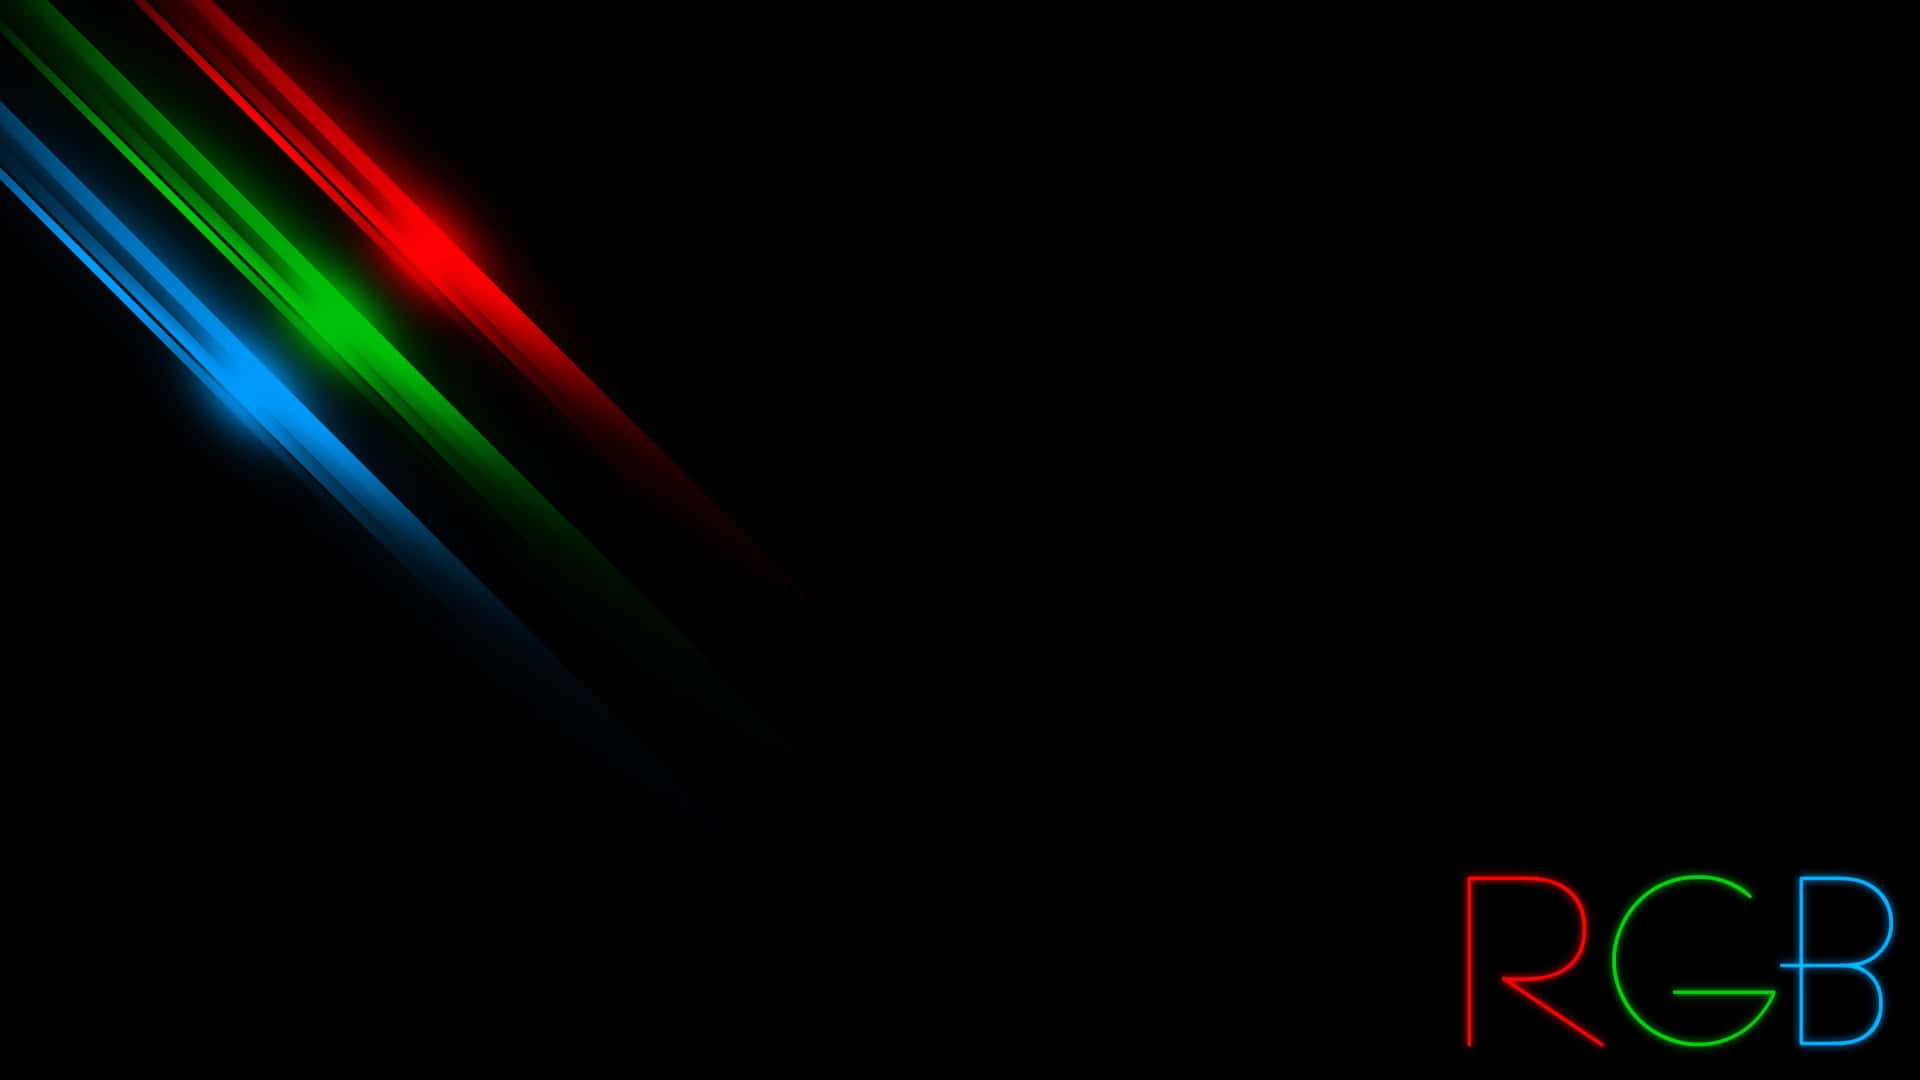 Rich digital color gradient background with red,green and blue flowing into each other